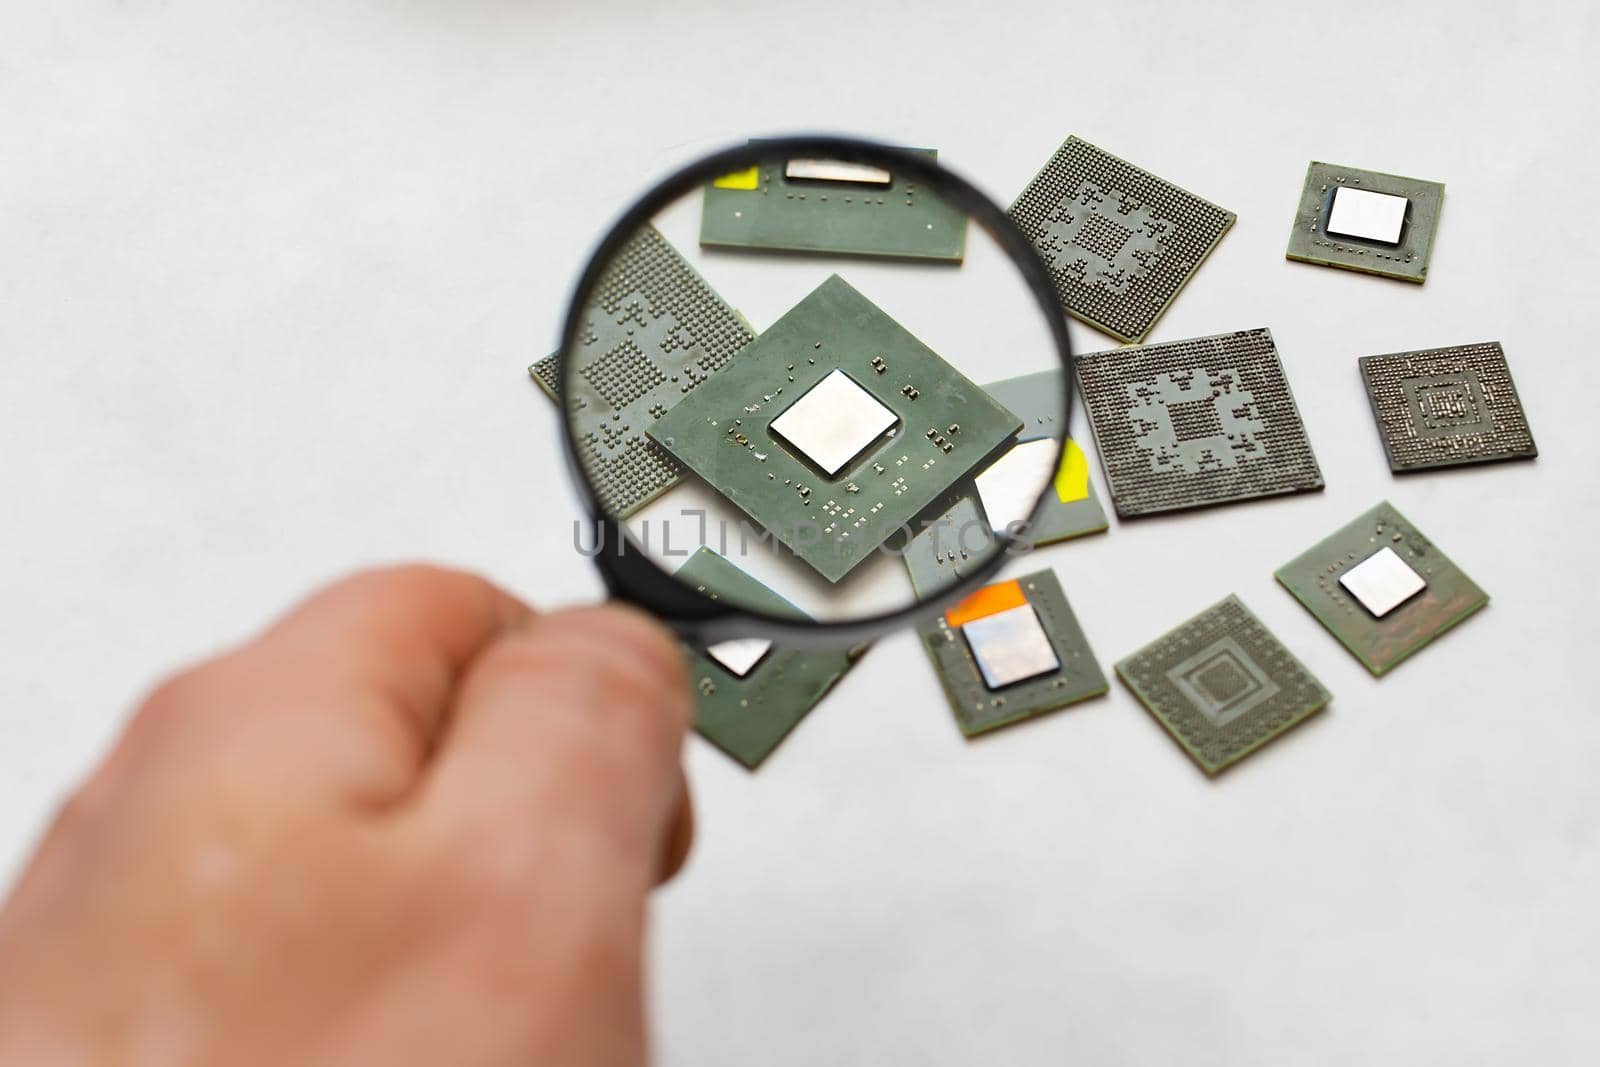 computer chip, a microprocessor that a person views through a magnifying glass by jk3030